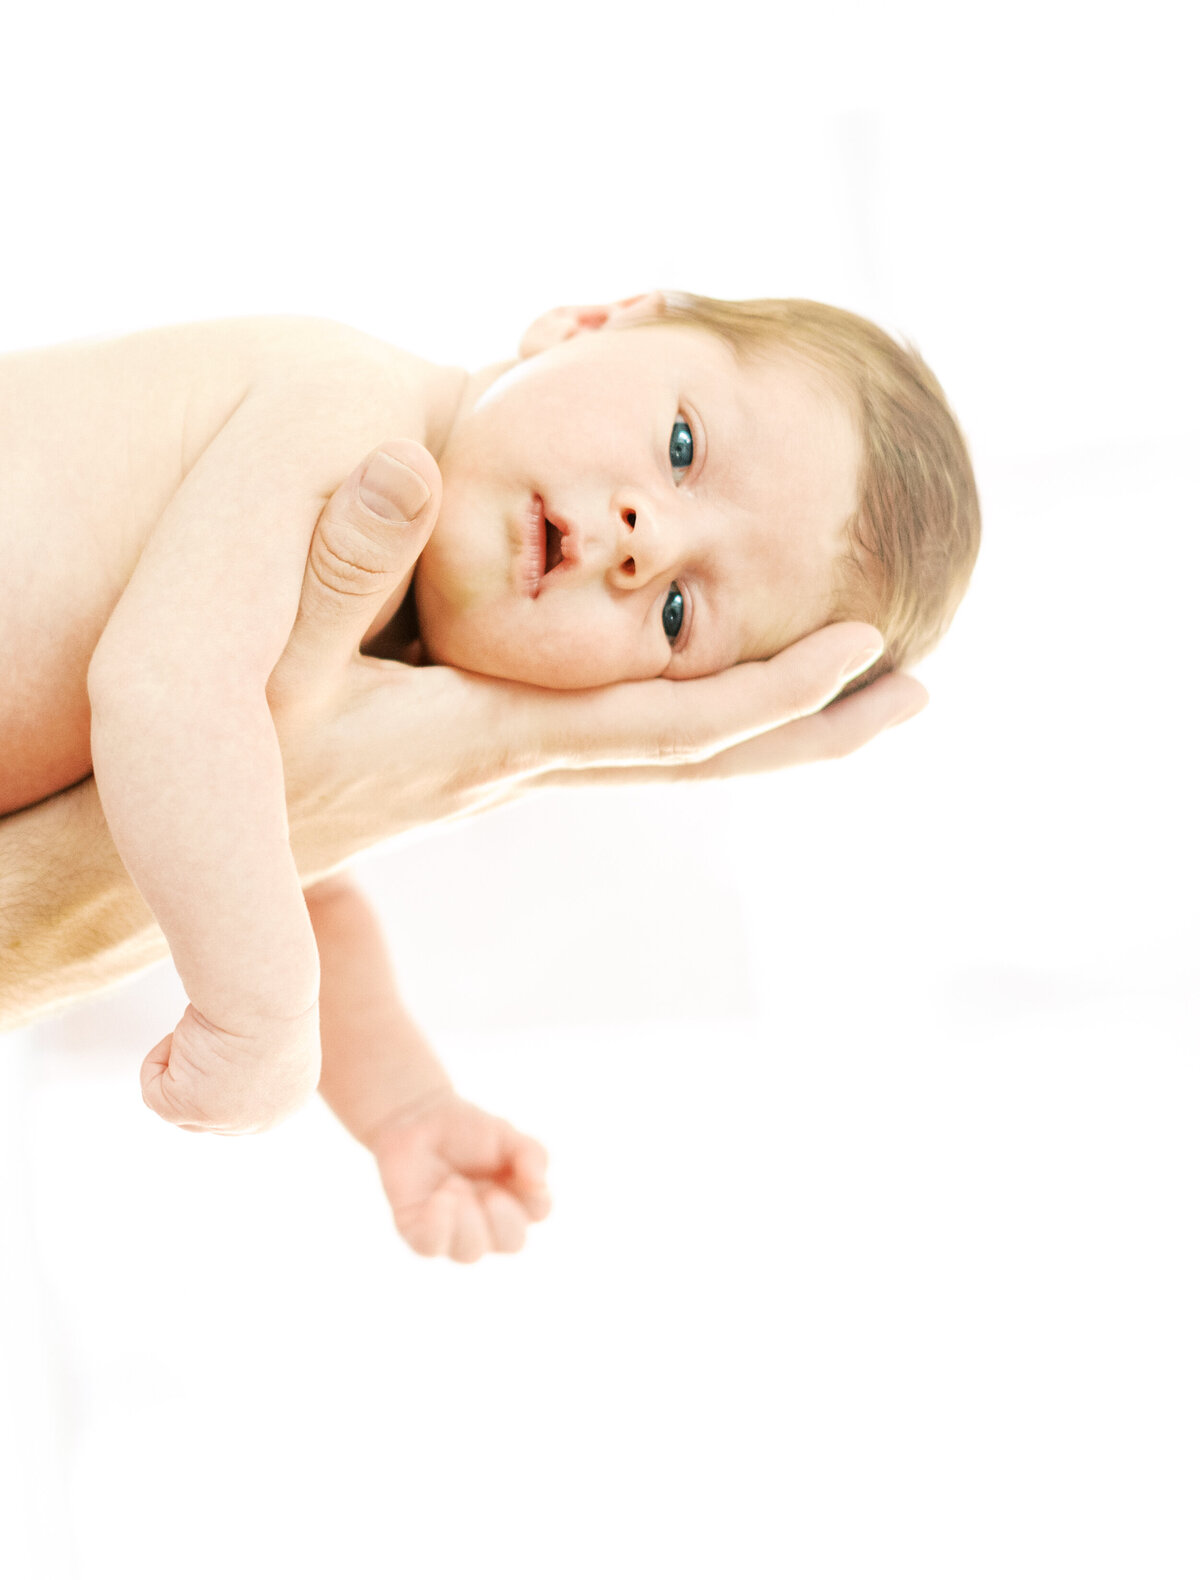 Portrait of a shirtless newborn baby lying on palm of a mans hands.